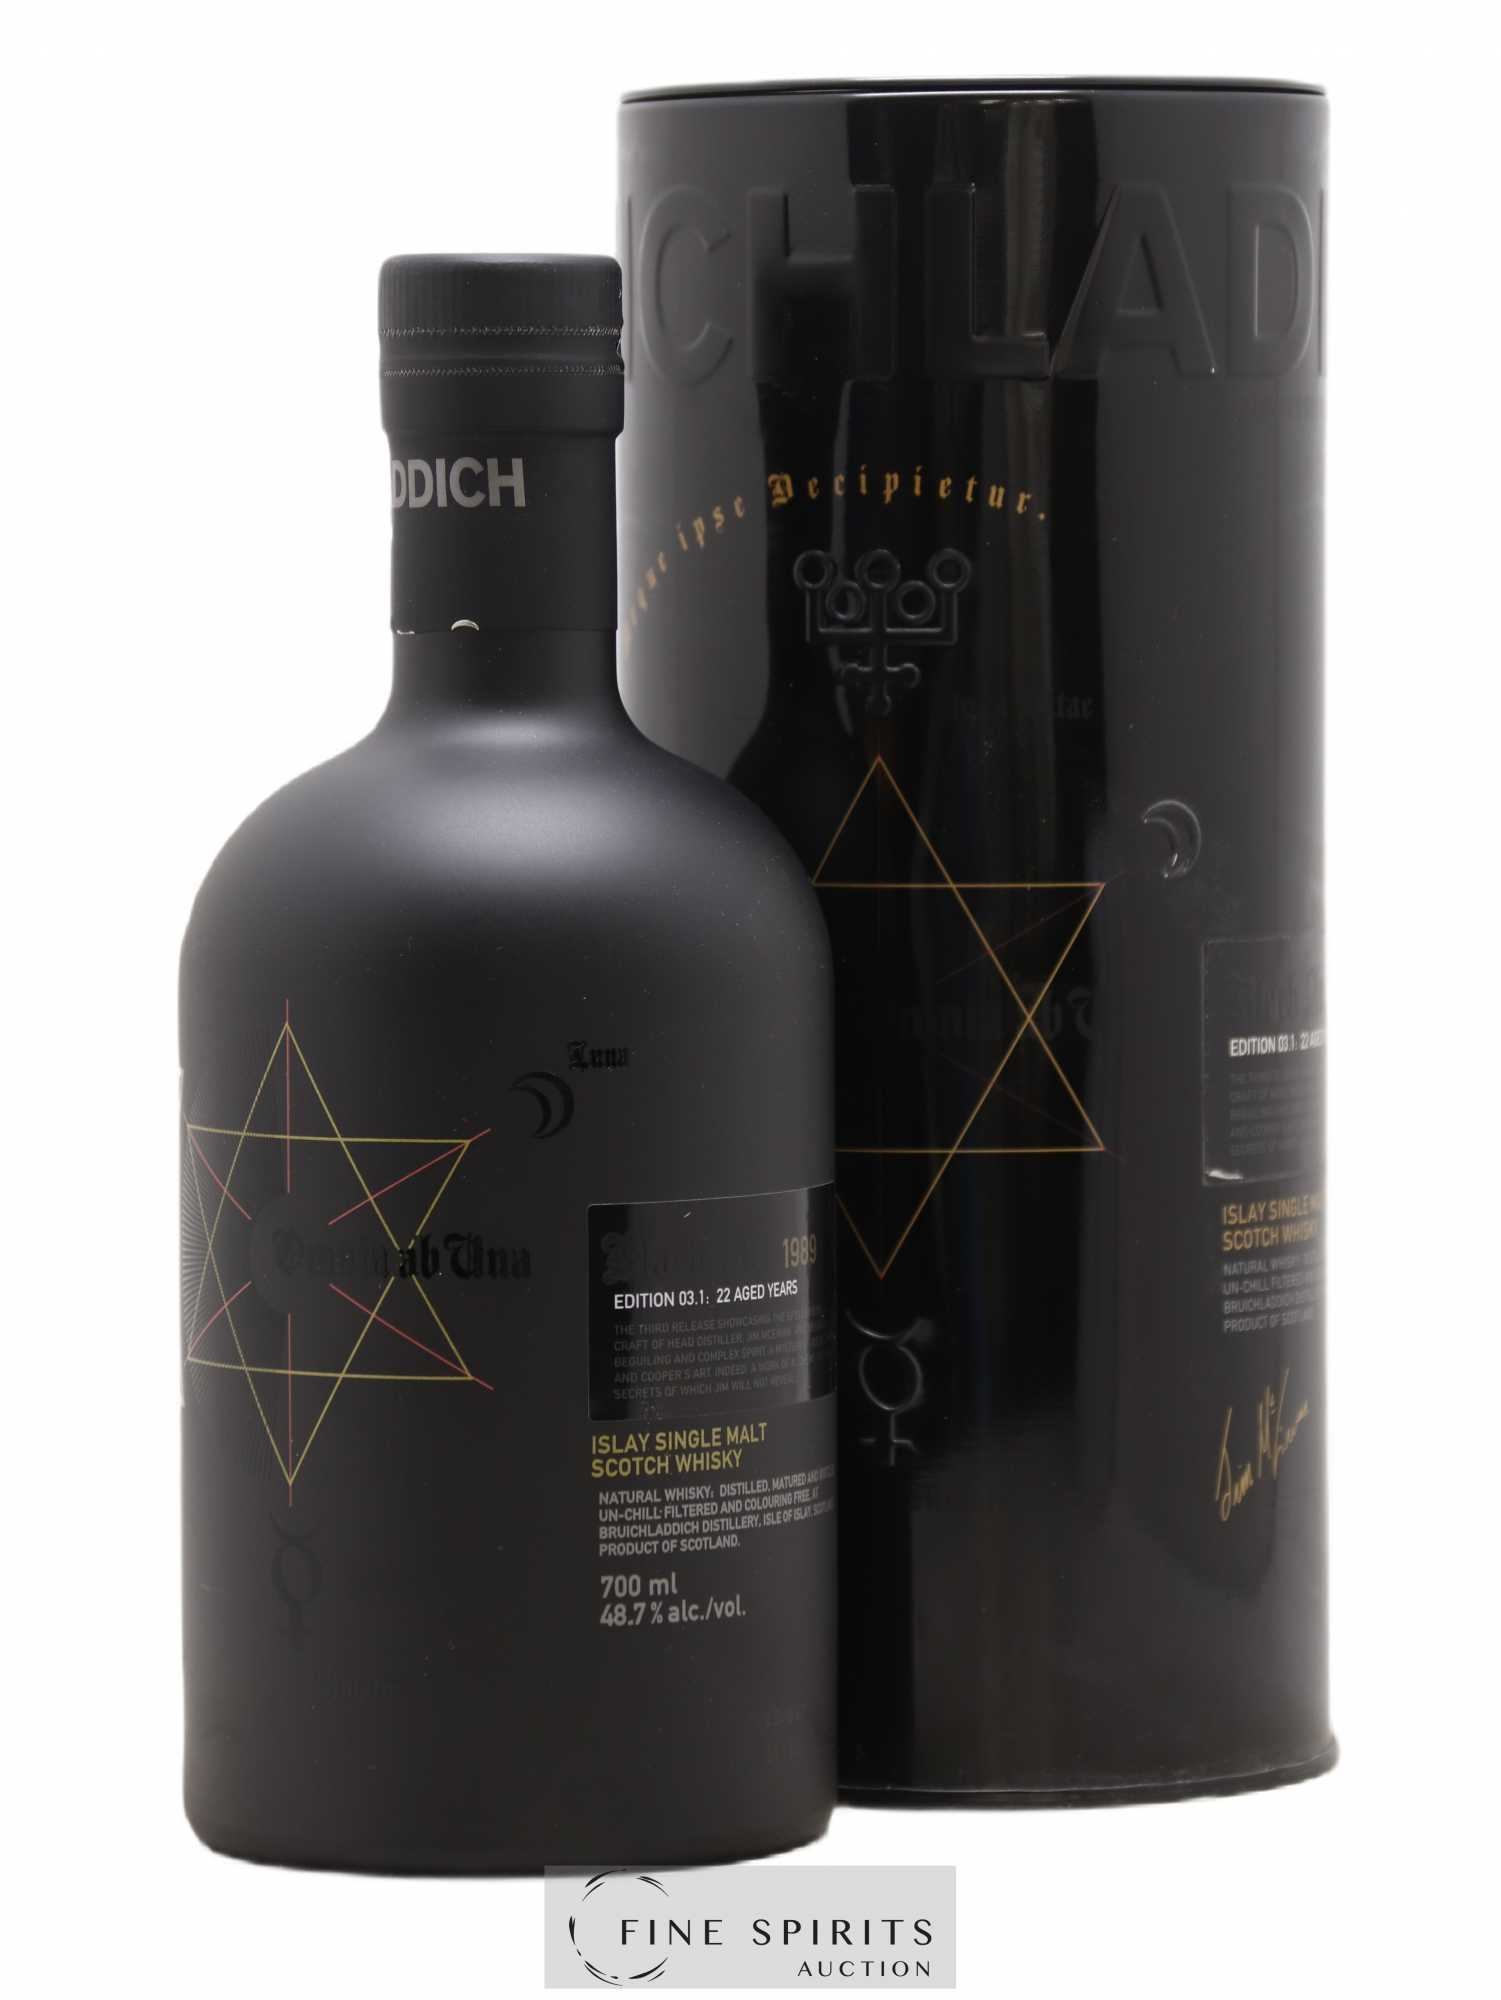 Bruichladdich 22 years 1989 Of. Black Art Edition 03.1 3rd Release 